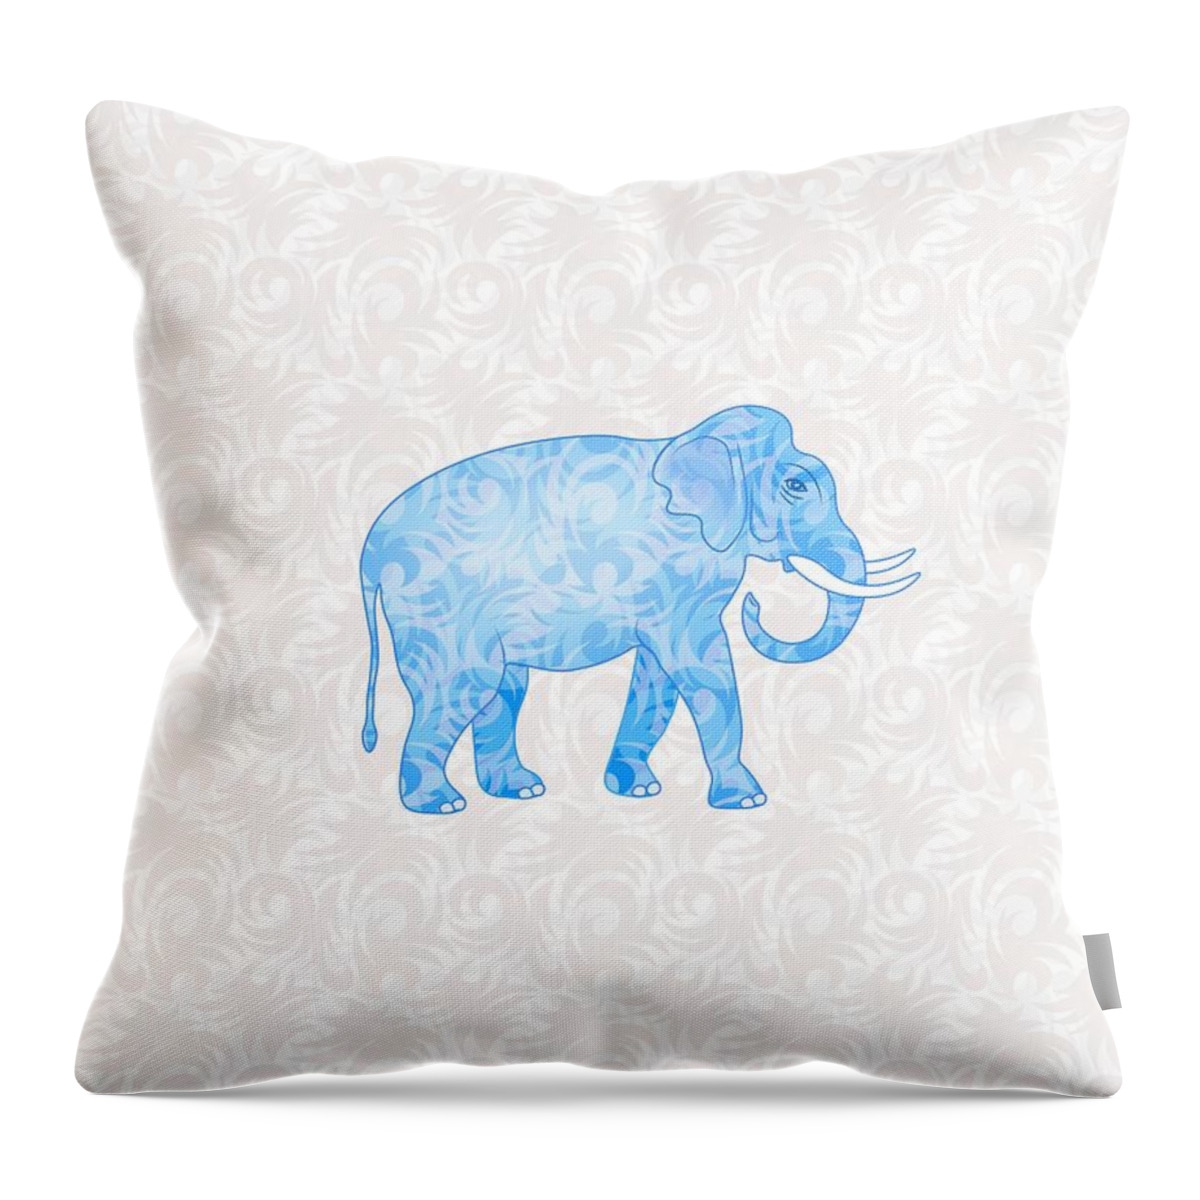 Elephant Throw Pillow featuring the digital art Blue Damask Elephant by Antique Images 